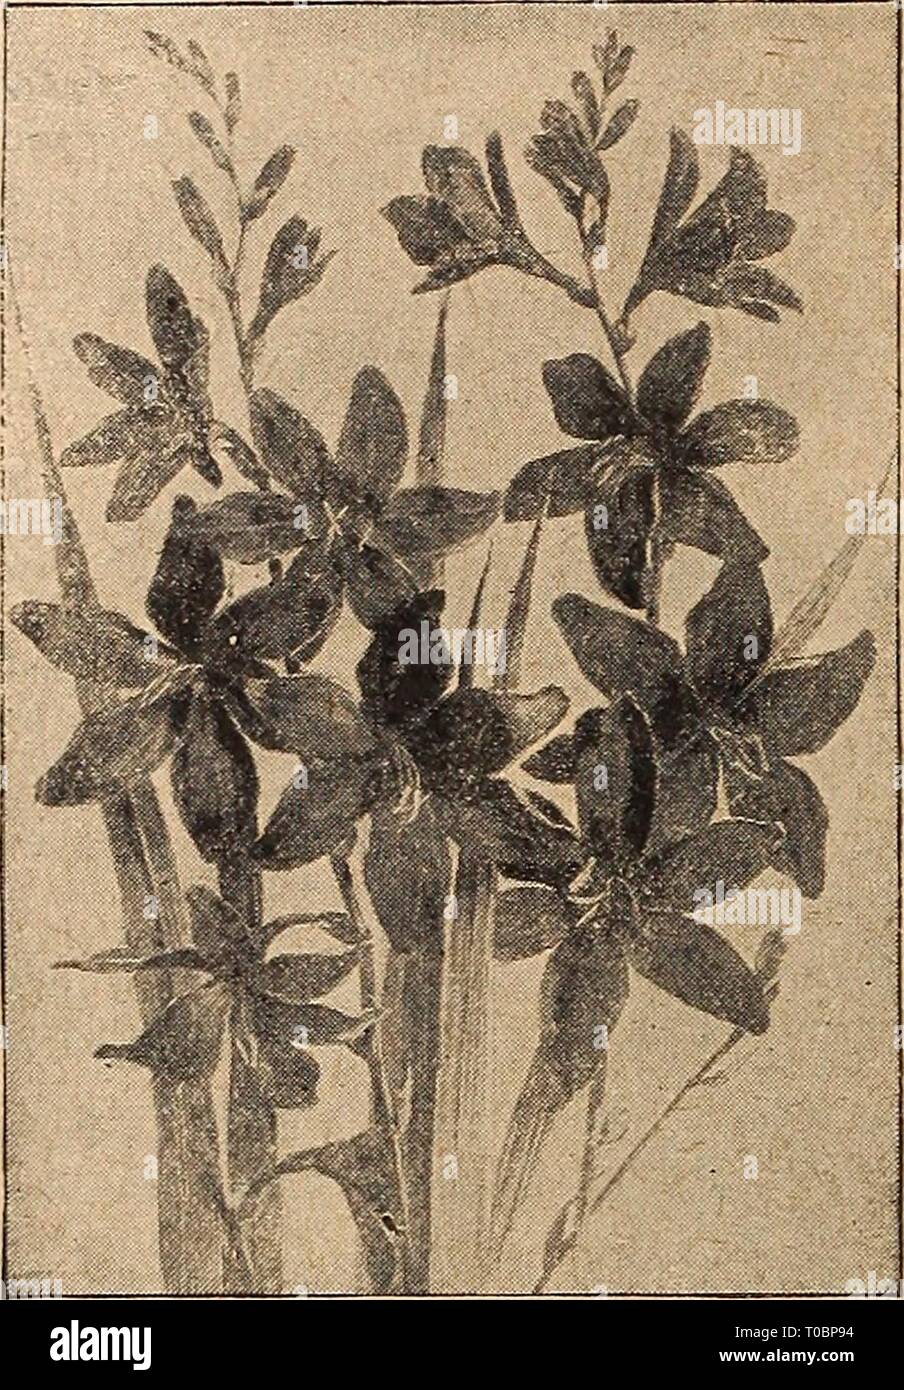 Dreer's garden book 1920 (1920) Dreer's garden book 1920 dreersgardenbook1920henr 0 Year: 1920  186 DRHR-fflllADaPniA-M-BBf HARDY PERENNIAL PLANT!    MONTBRETIAS MARSHALLIA Trinervis. A useful plant for a shady, damp spot, of neat habit, about 15 inches high, bearing freely from June to August heads of white flowers, tinted flesh. 25 cts. each; $2.50 per doz. MERTENSIA (BiueBeiu) Virginlca. An early spring-flowering plant, growing about 1 to lj feet high, with droop- ing panicles of handsome light blue flowers, fading to clear pink; one of the most, inter- esting of our native spring flowers;  Stock Photo